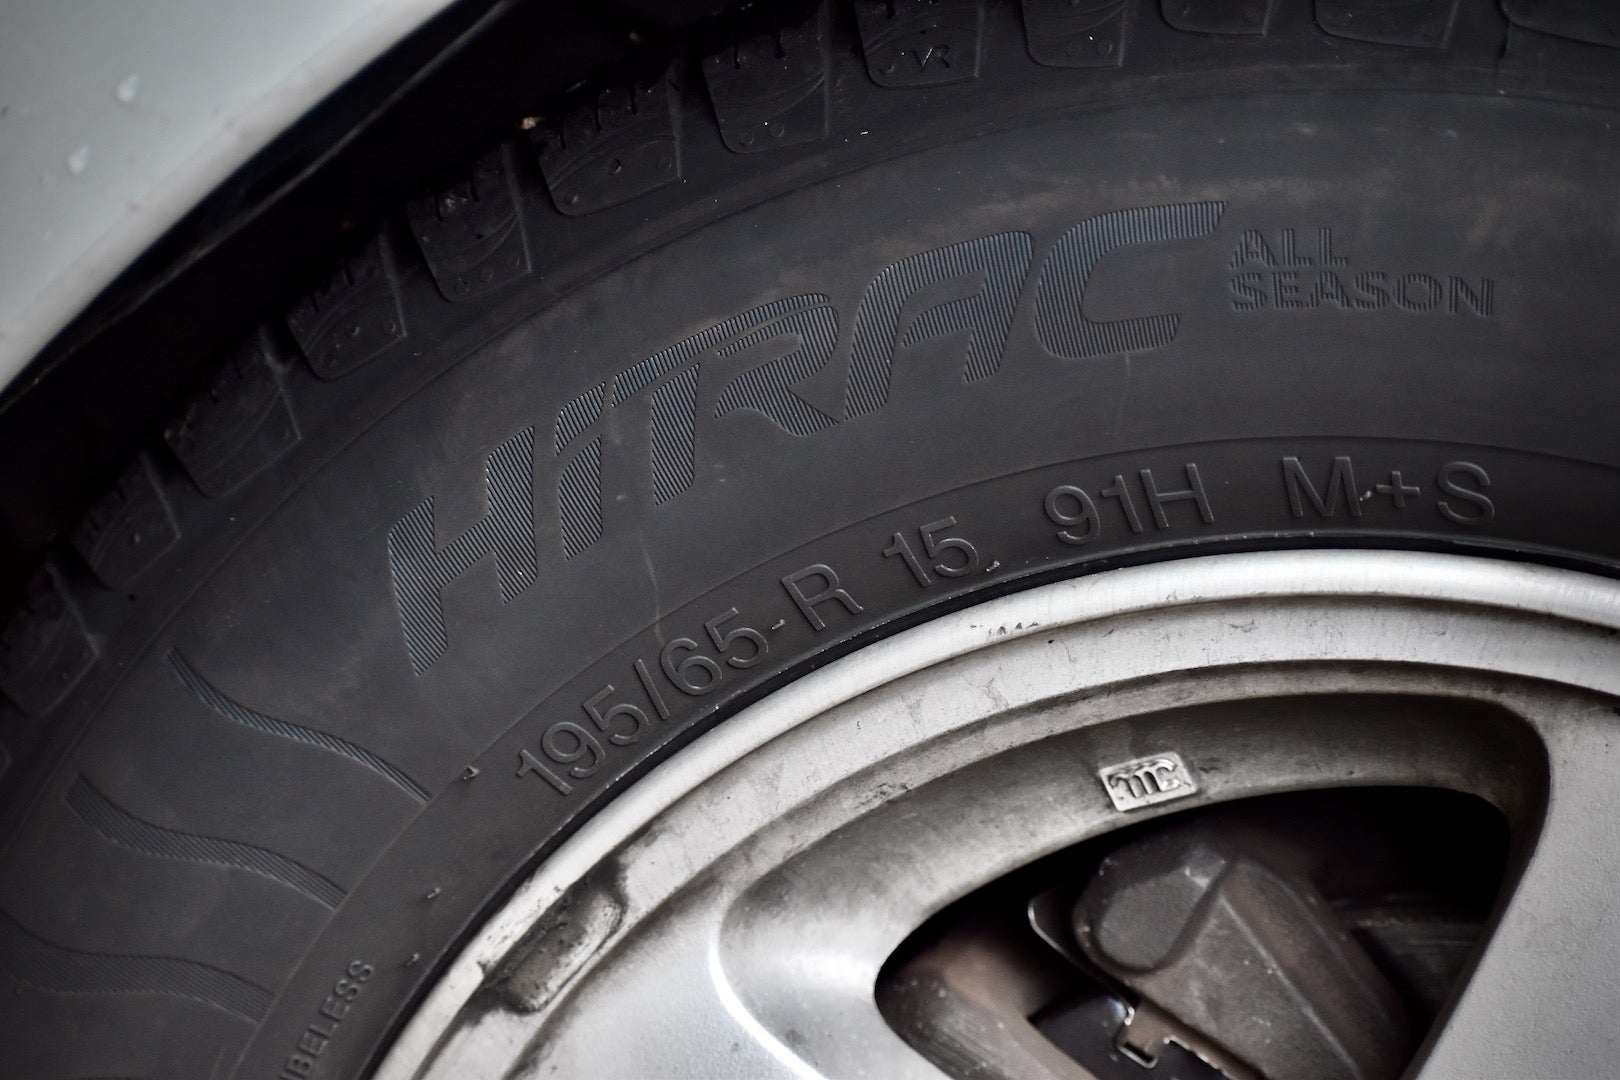 HiTrac casting on the Vredestein HiTrac All-Season tires